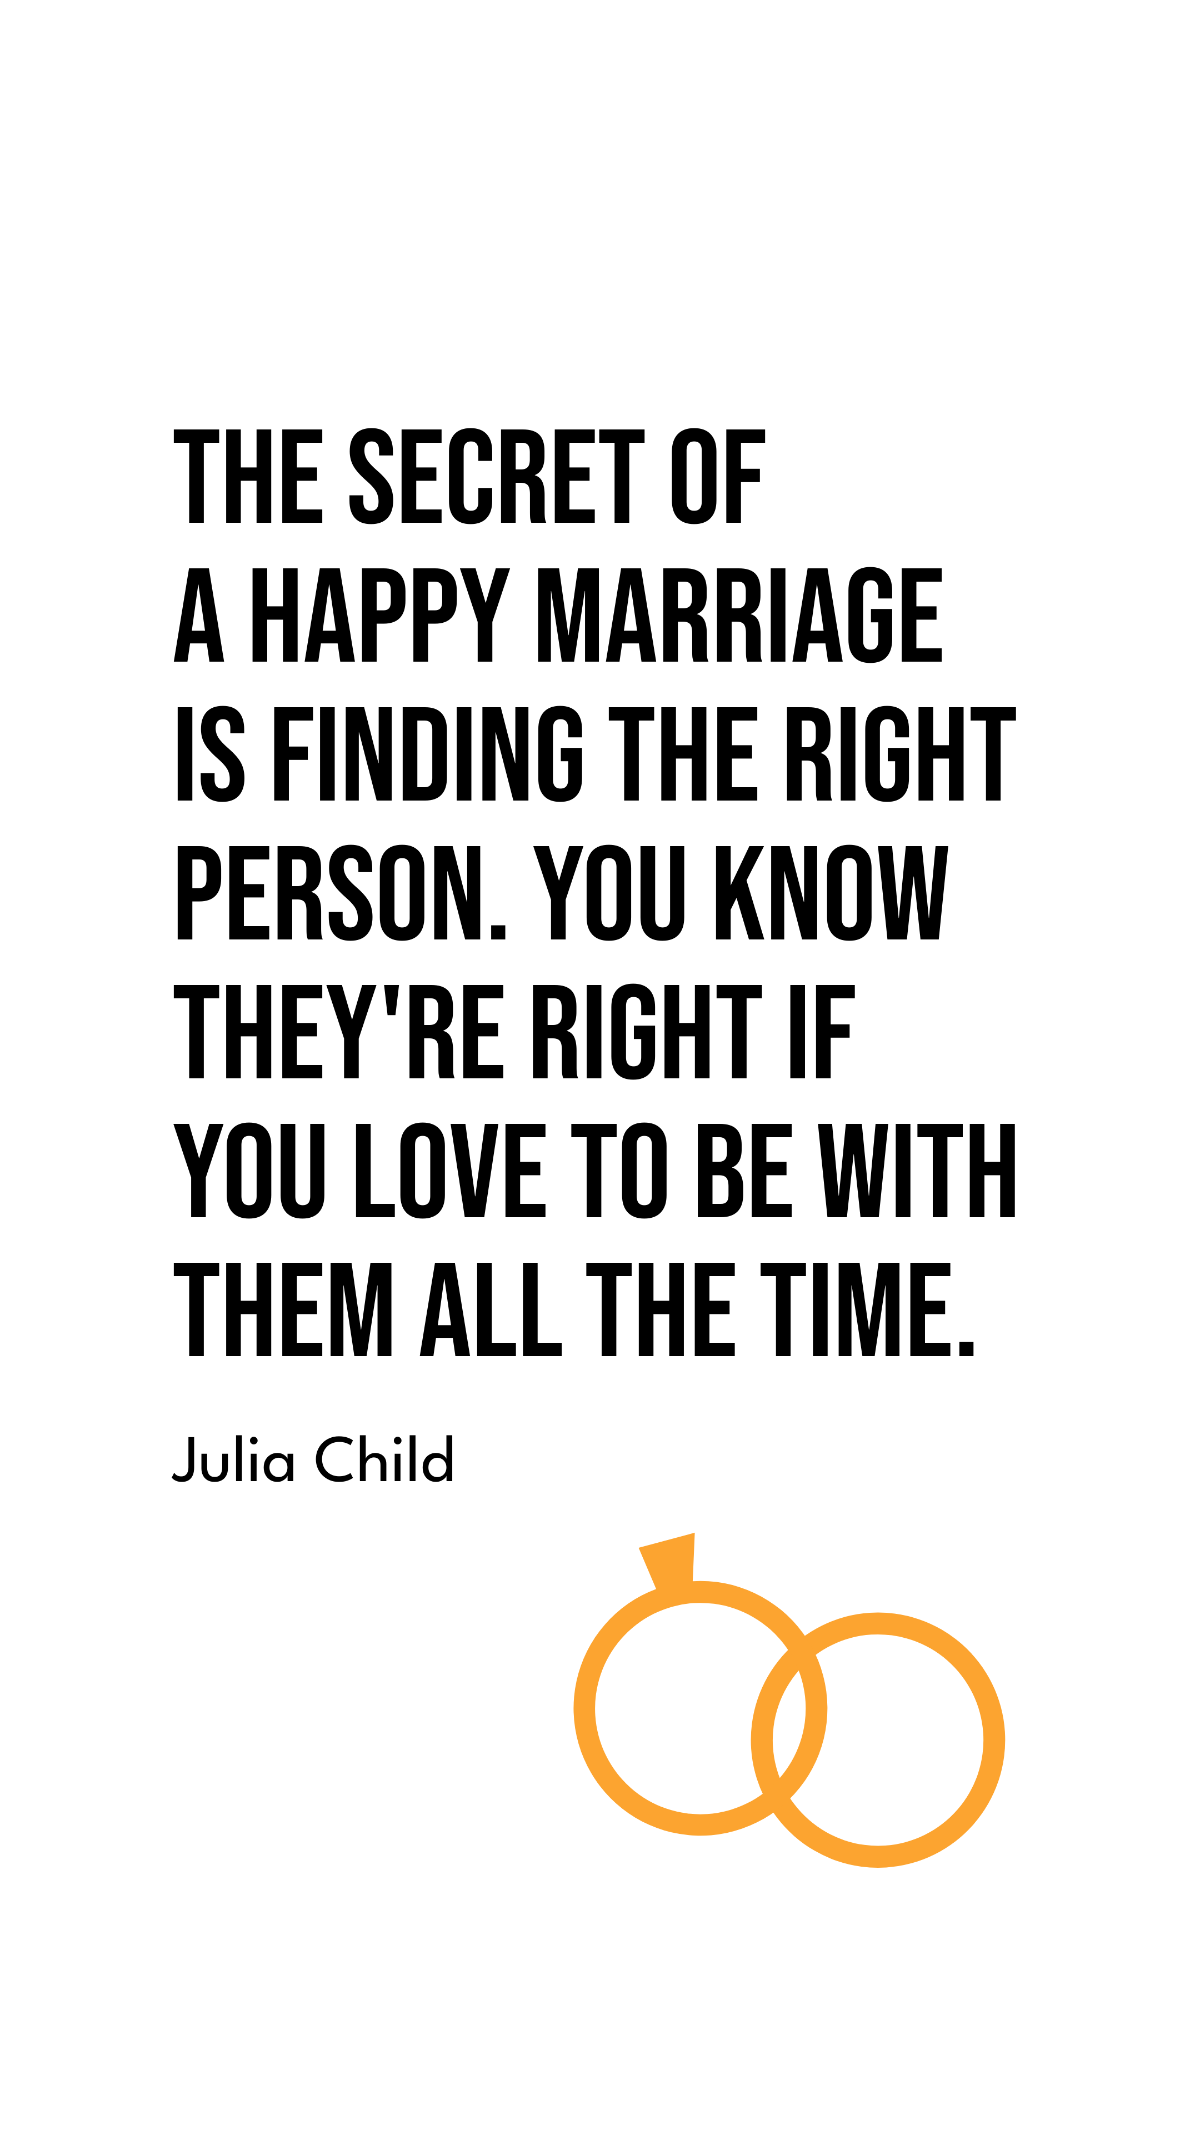 Free Julia Child - The secret of a happy marriage is finding the right person. You know they're right if you love to be with them all the time. Template